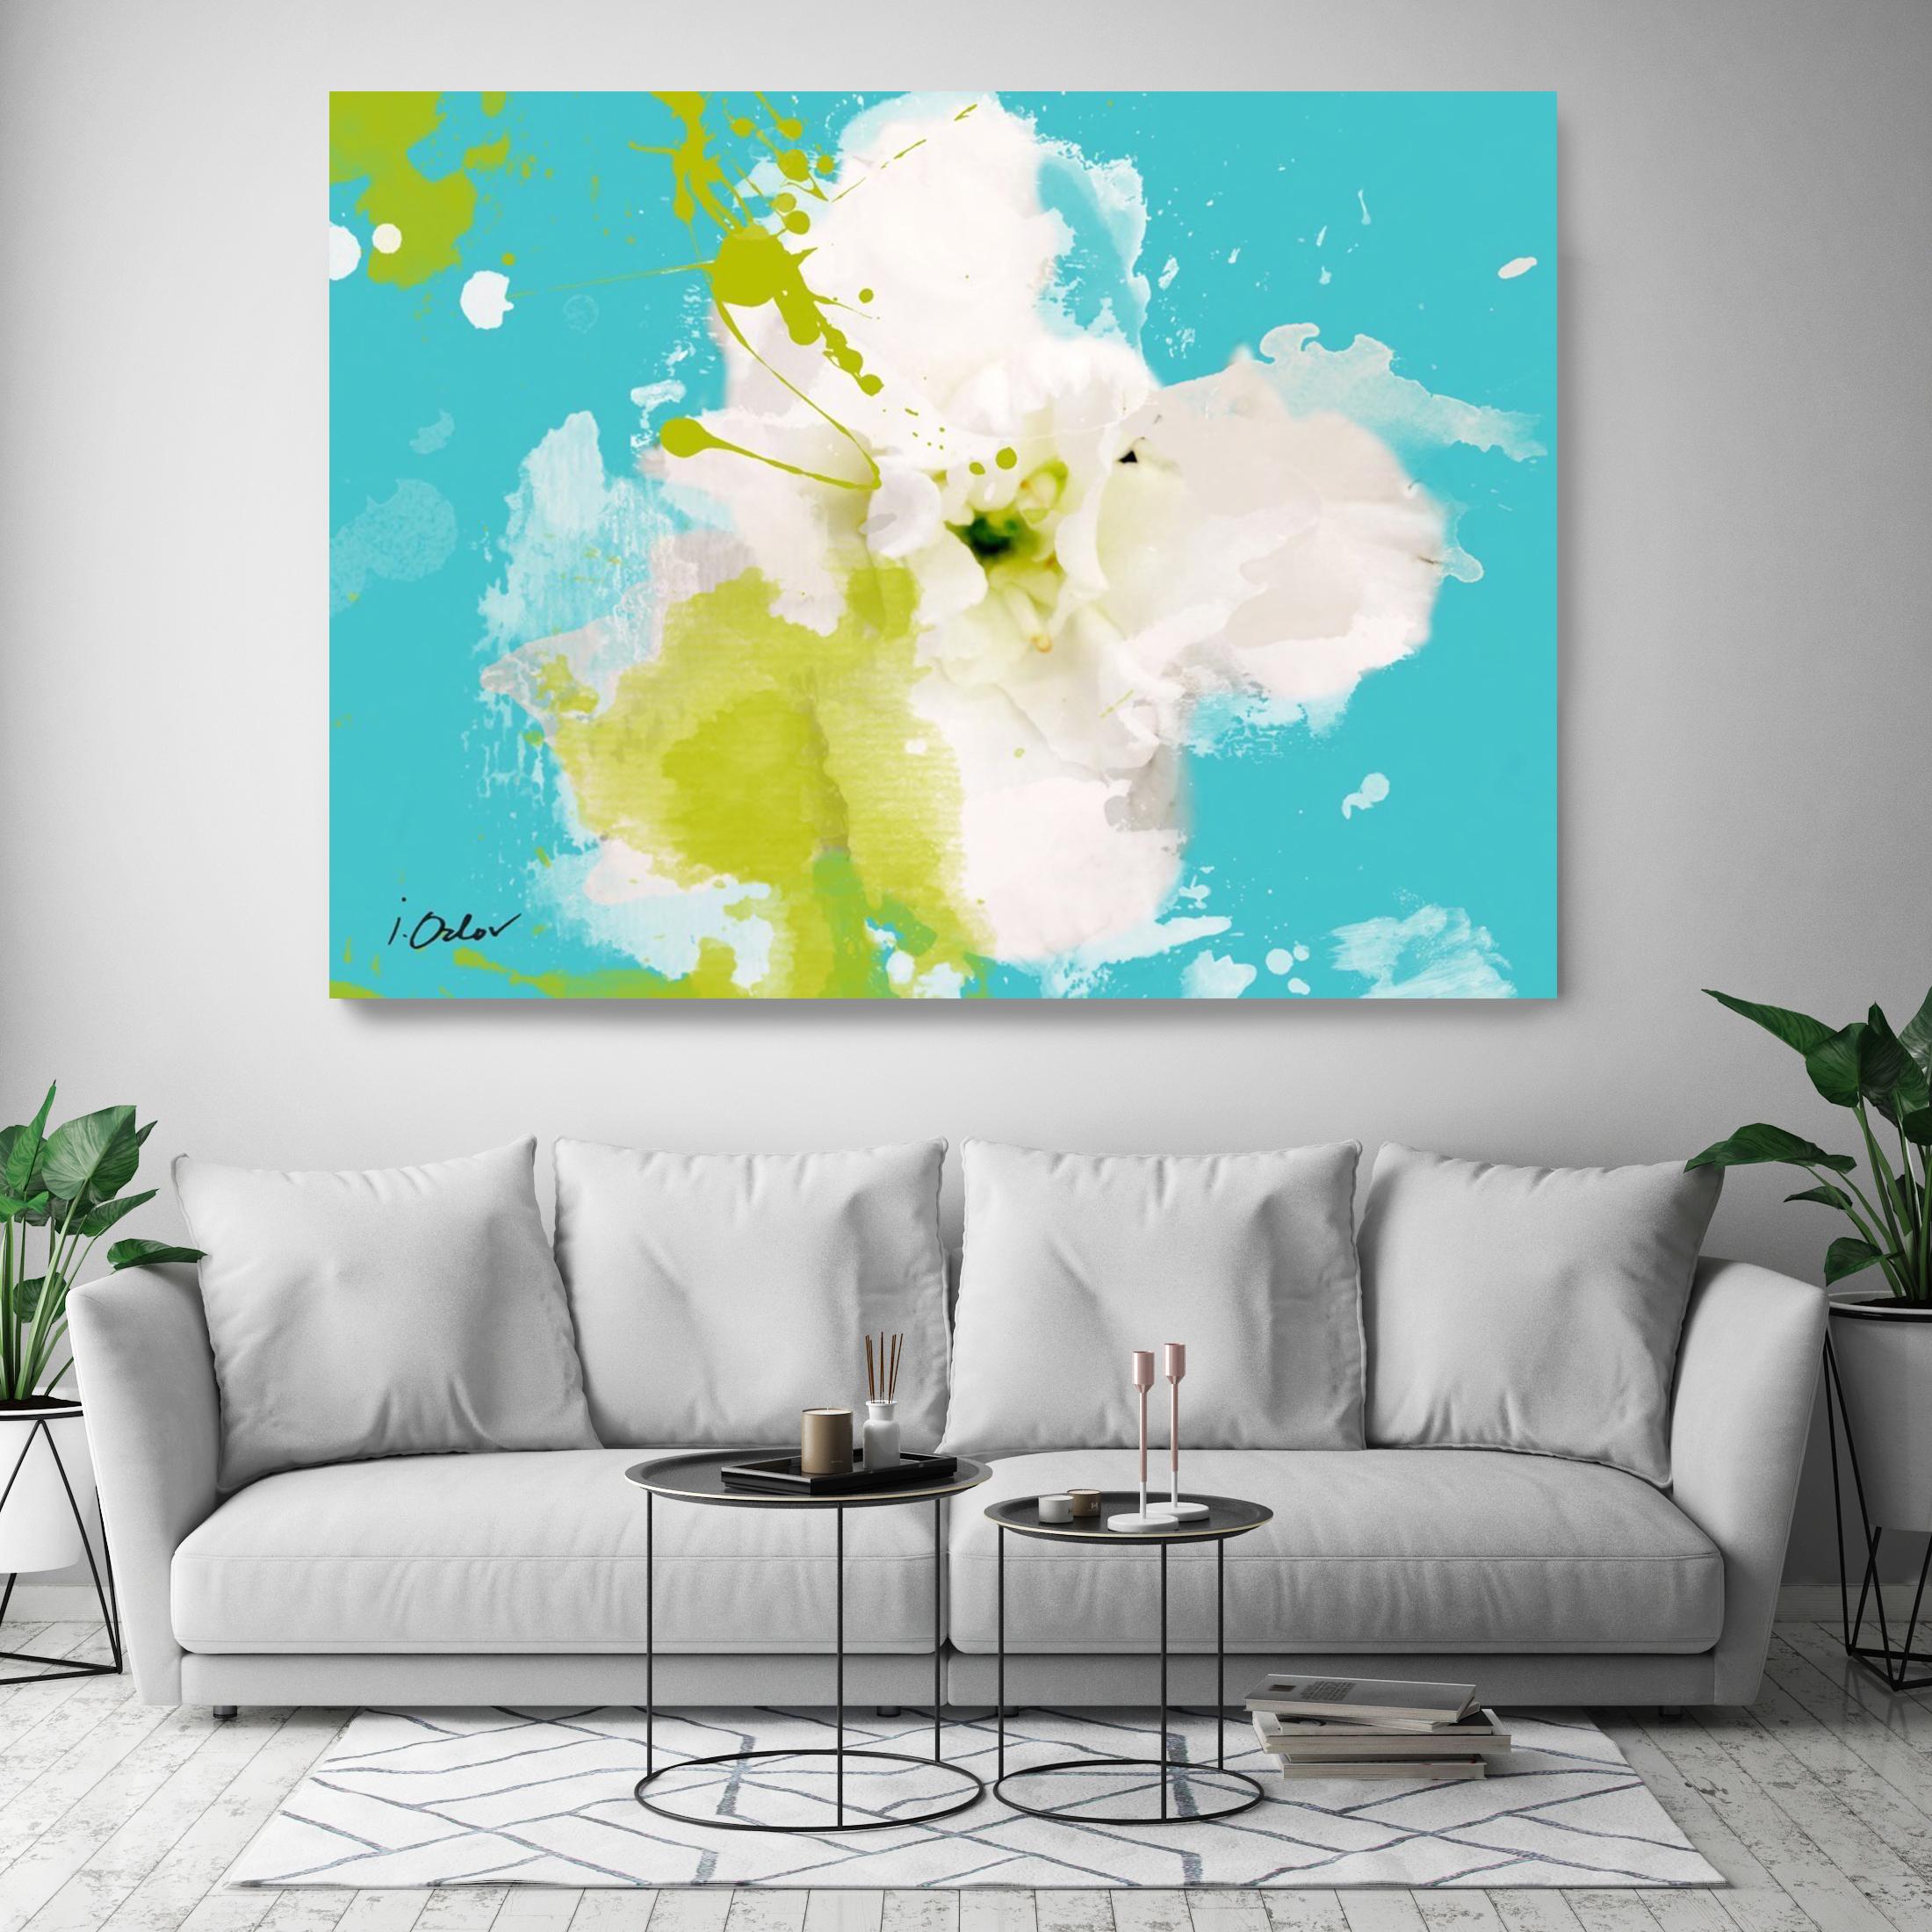 Aqua White Flower Bright Painting Hand Embellished Giclee on Canvas 60W x 40H

Collector's Edition Embellished Art Canvas Giclee With Brushstrokes and rich texture.

State-of-the-art HAND EMBELLISHED ∽ MUSEUM QUALITY ∽ DISPLAY READY Giclee